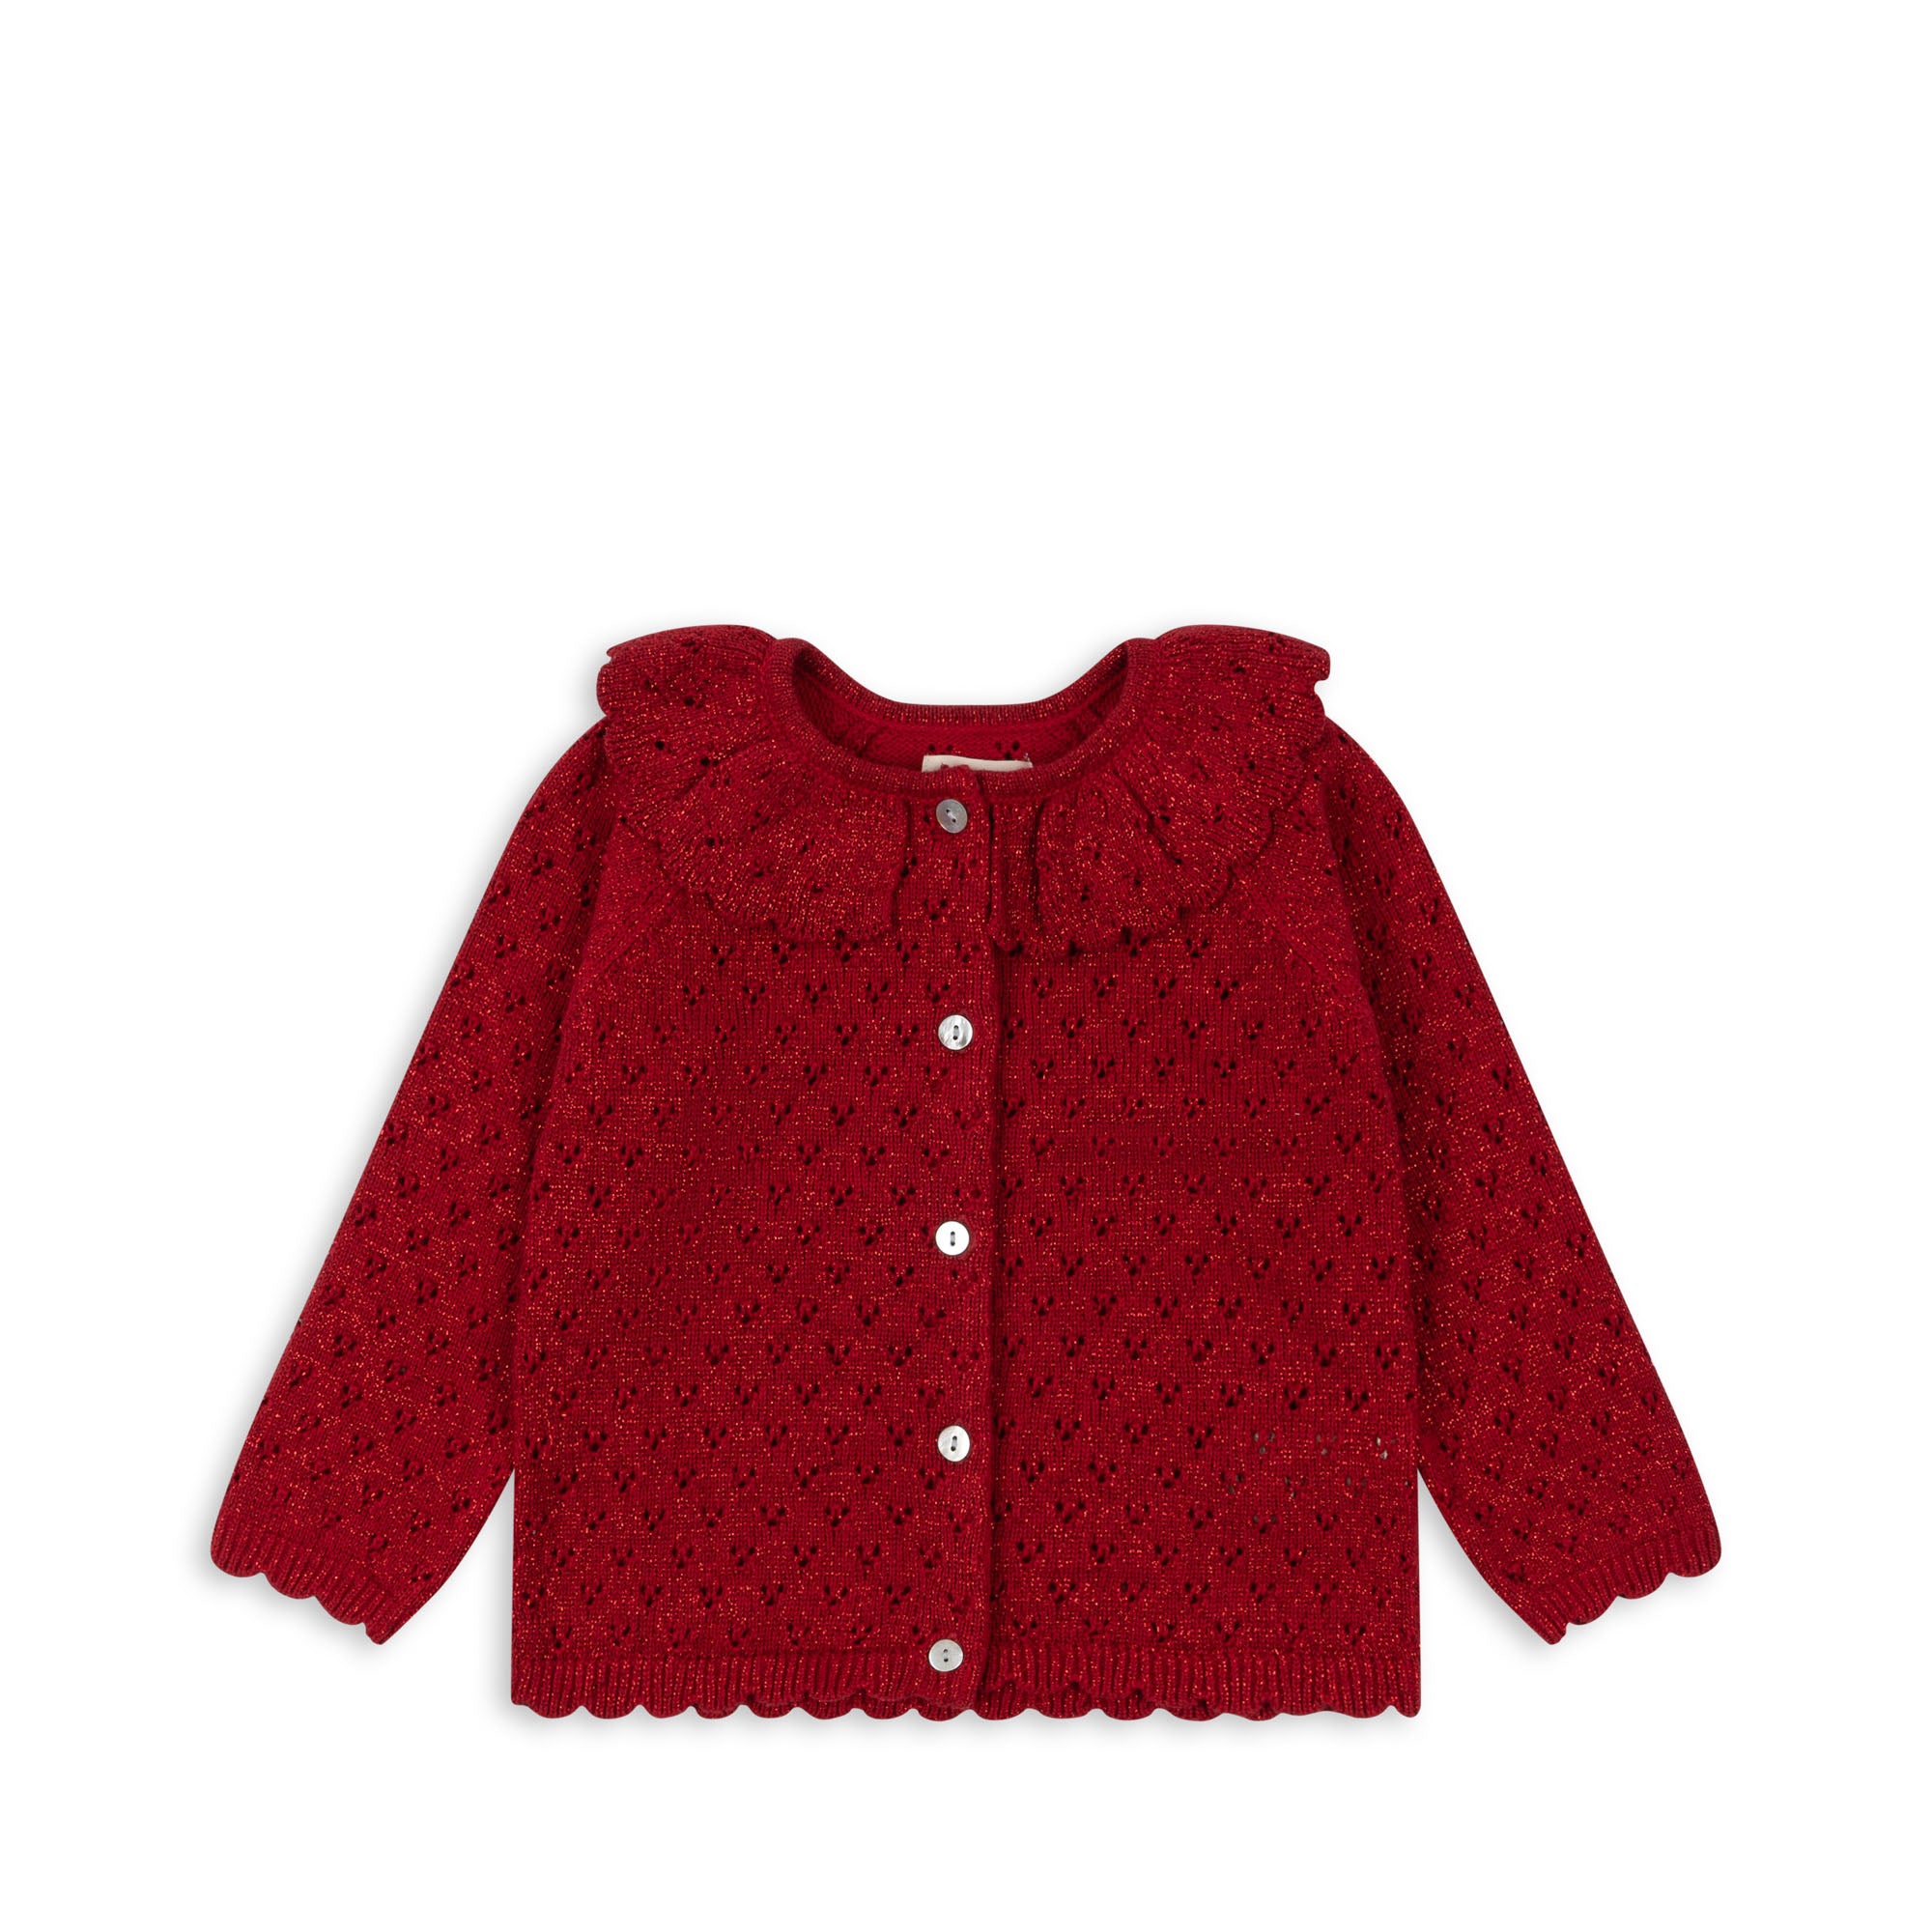 Konges Sløjd A/S Cardigans - Tricot savy red